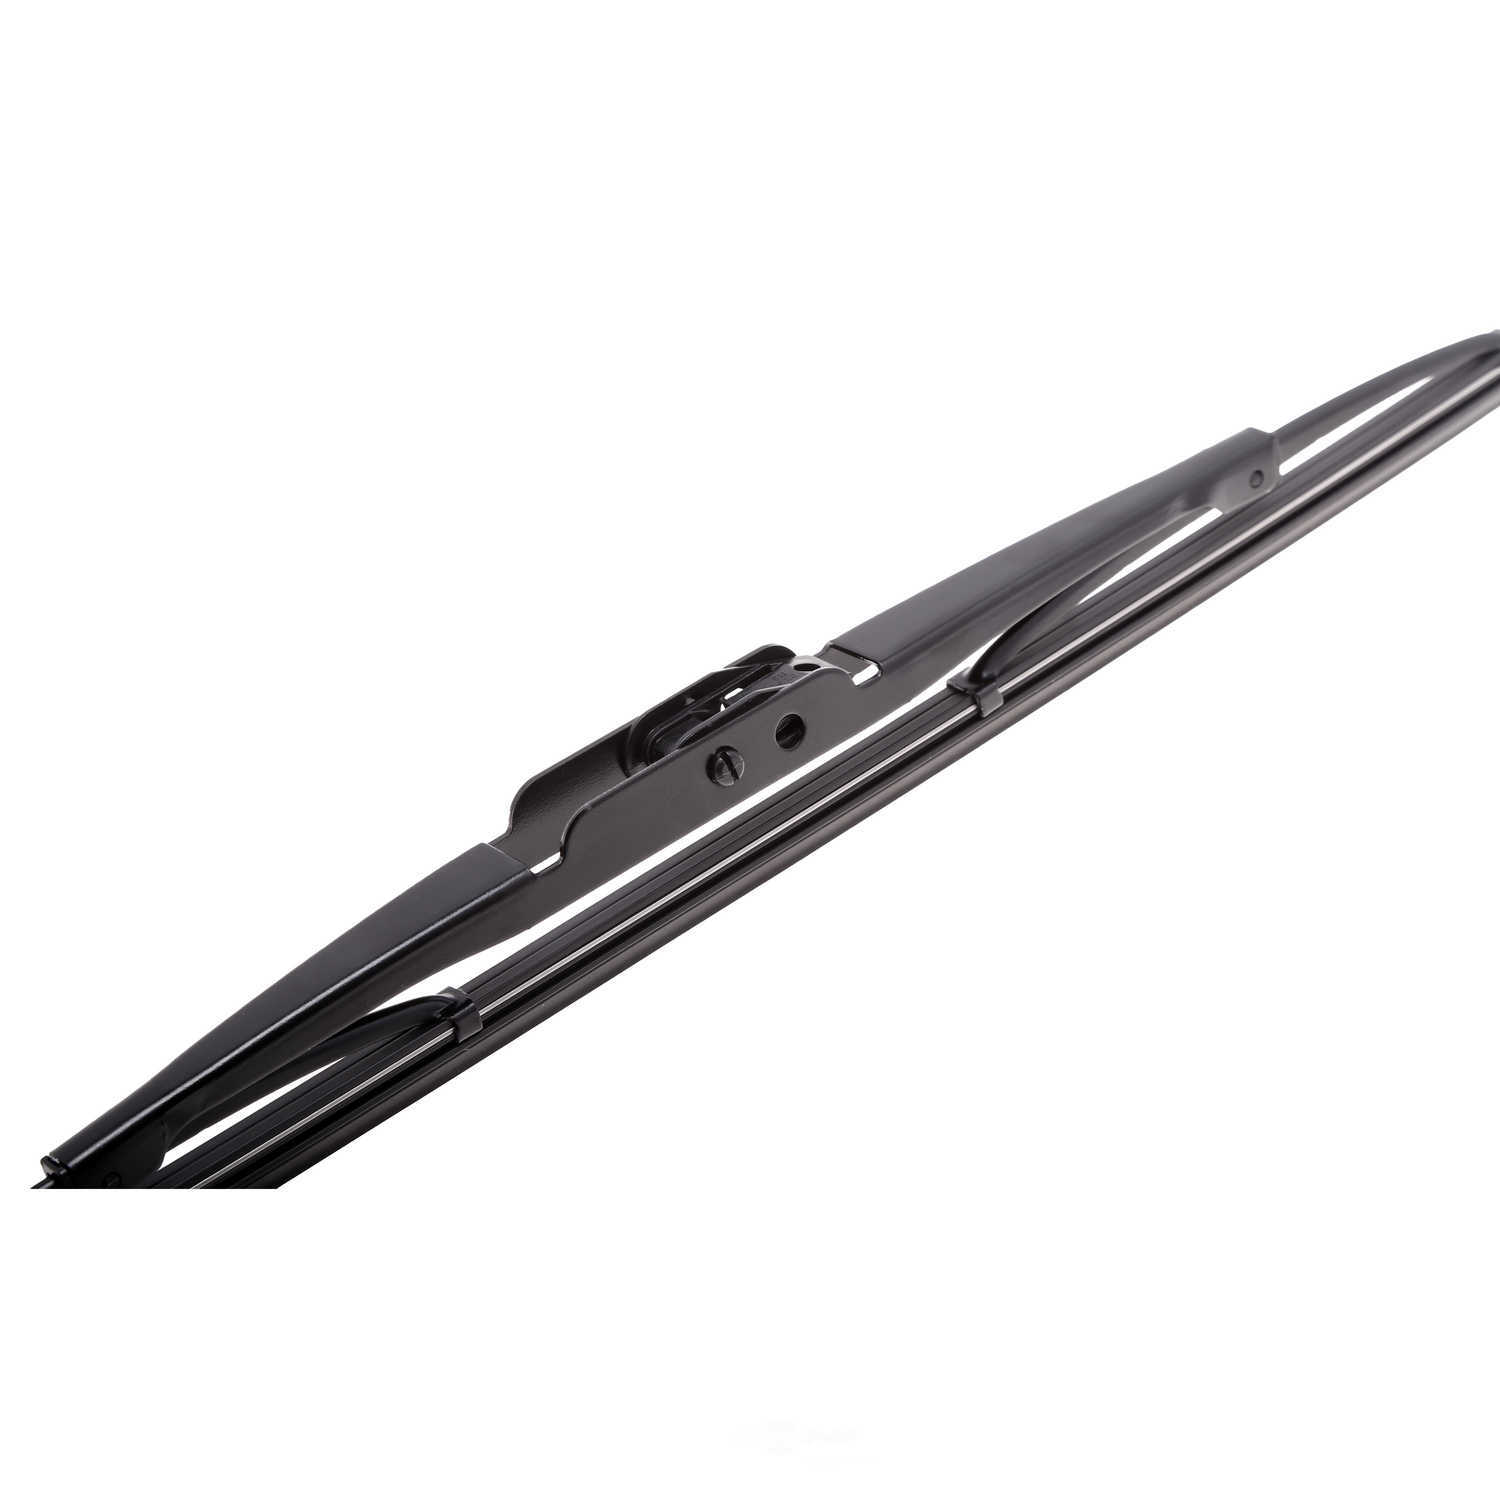 ANCO WIPER PRODUCTS - ANCO 97-Series Wiper Blade (Front Left) - ANC 97-13